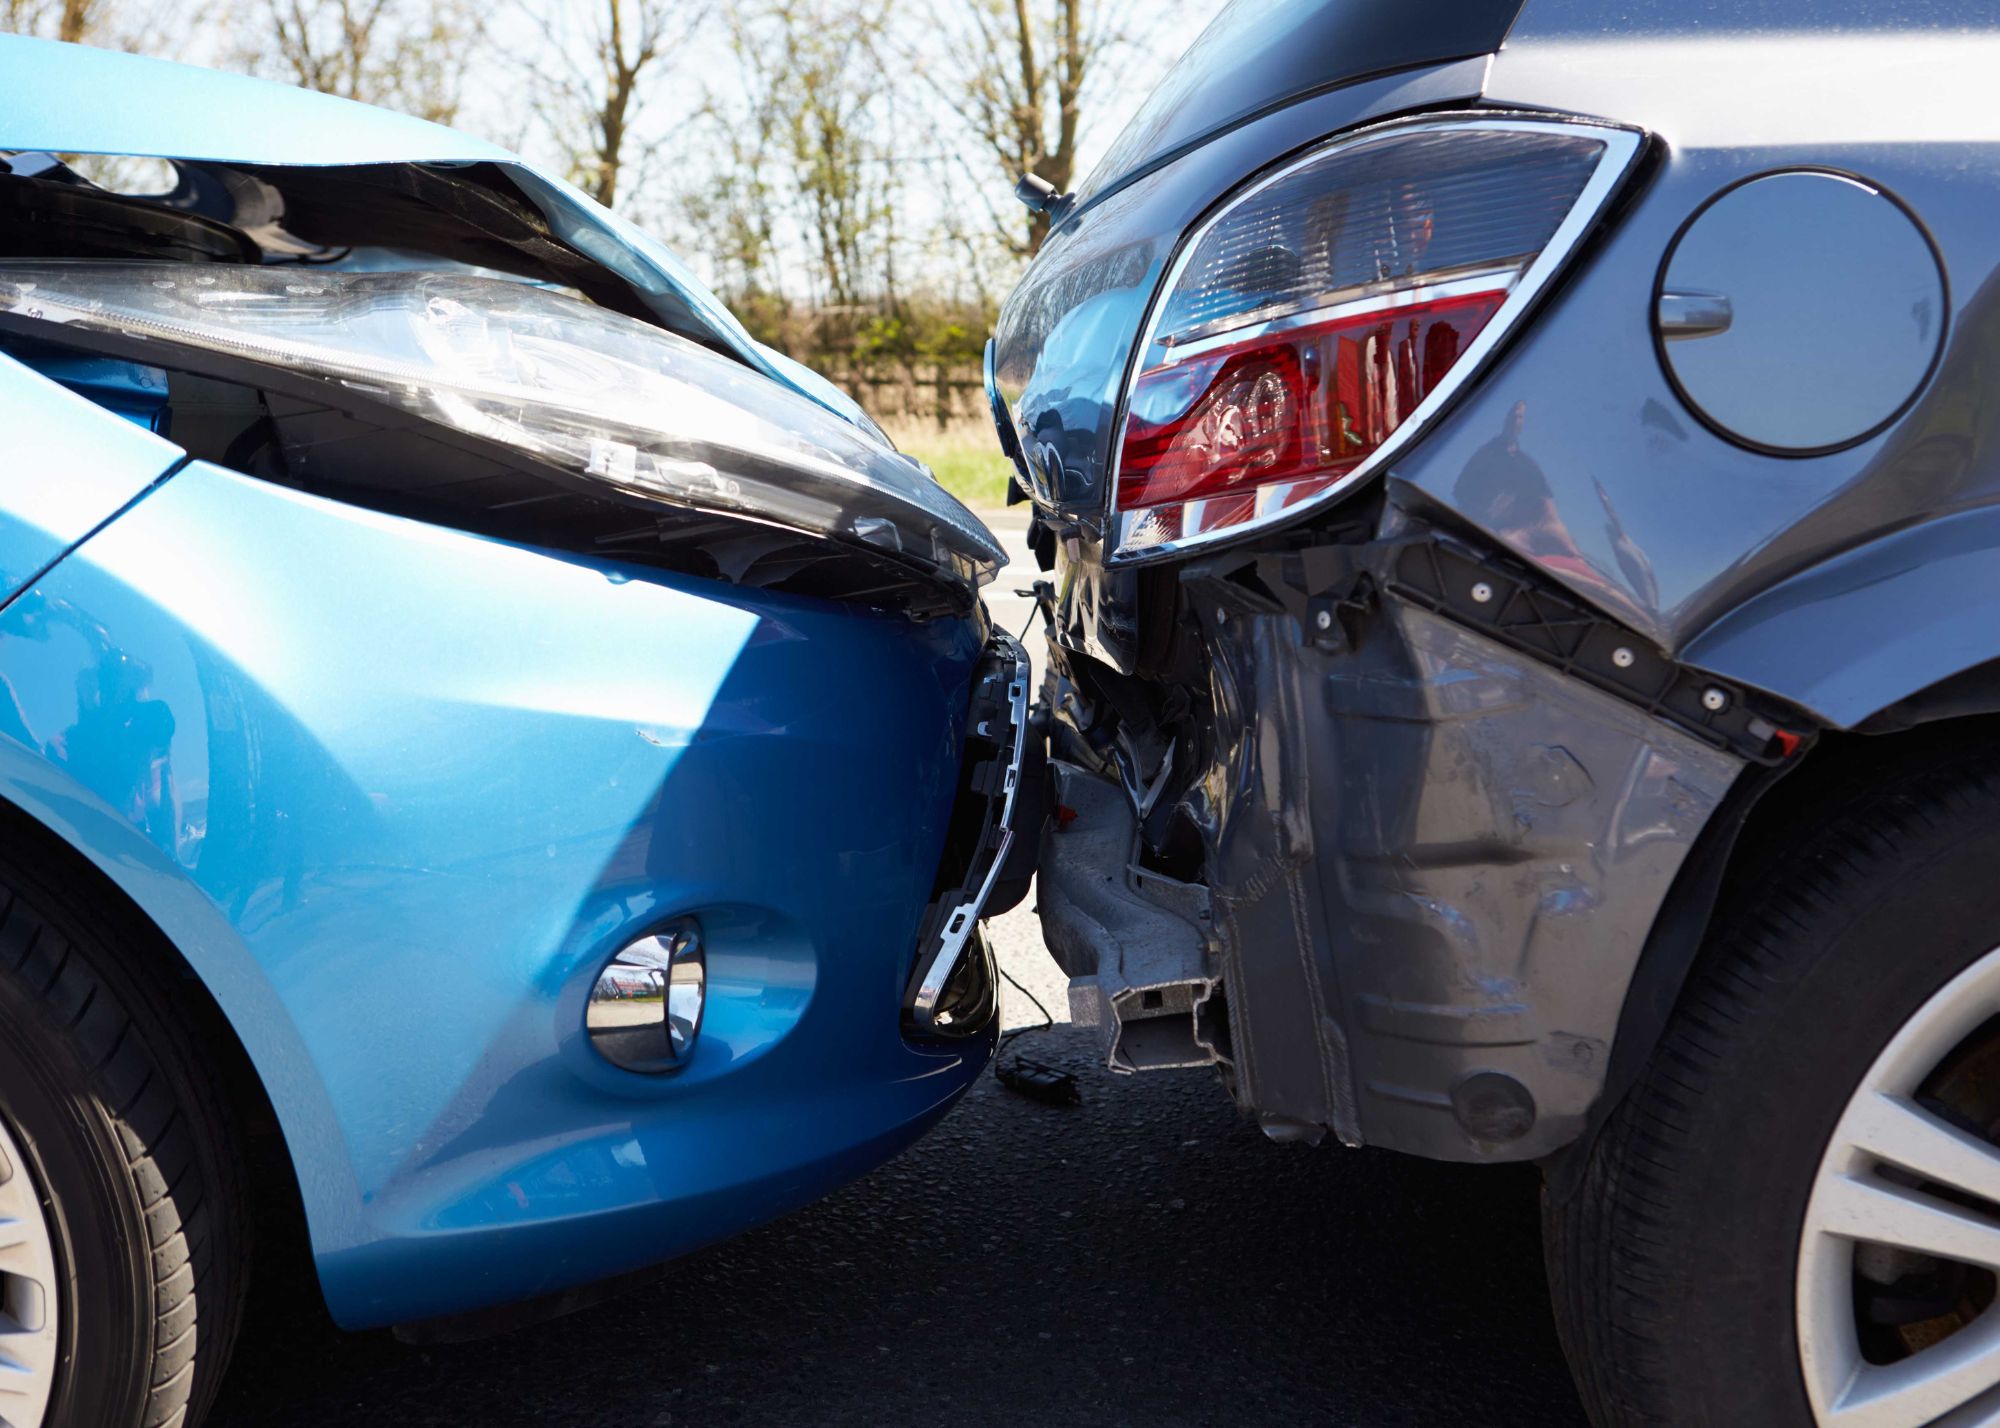 Understanding just what is SR22 Car Accident Insurance options for Phoenix residents